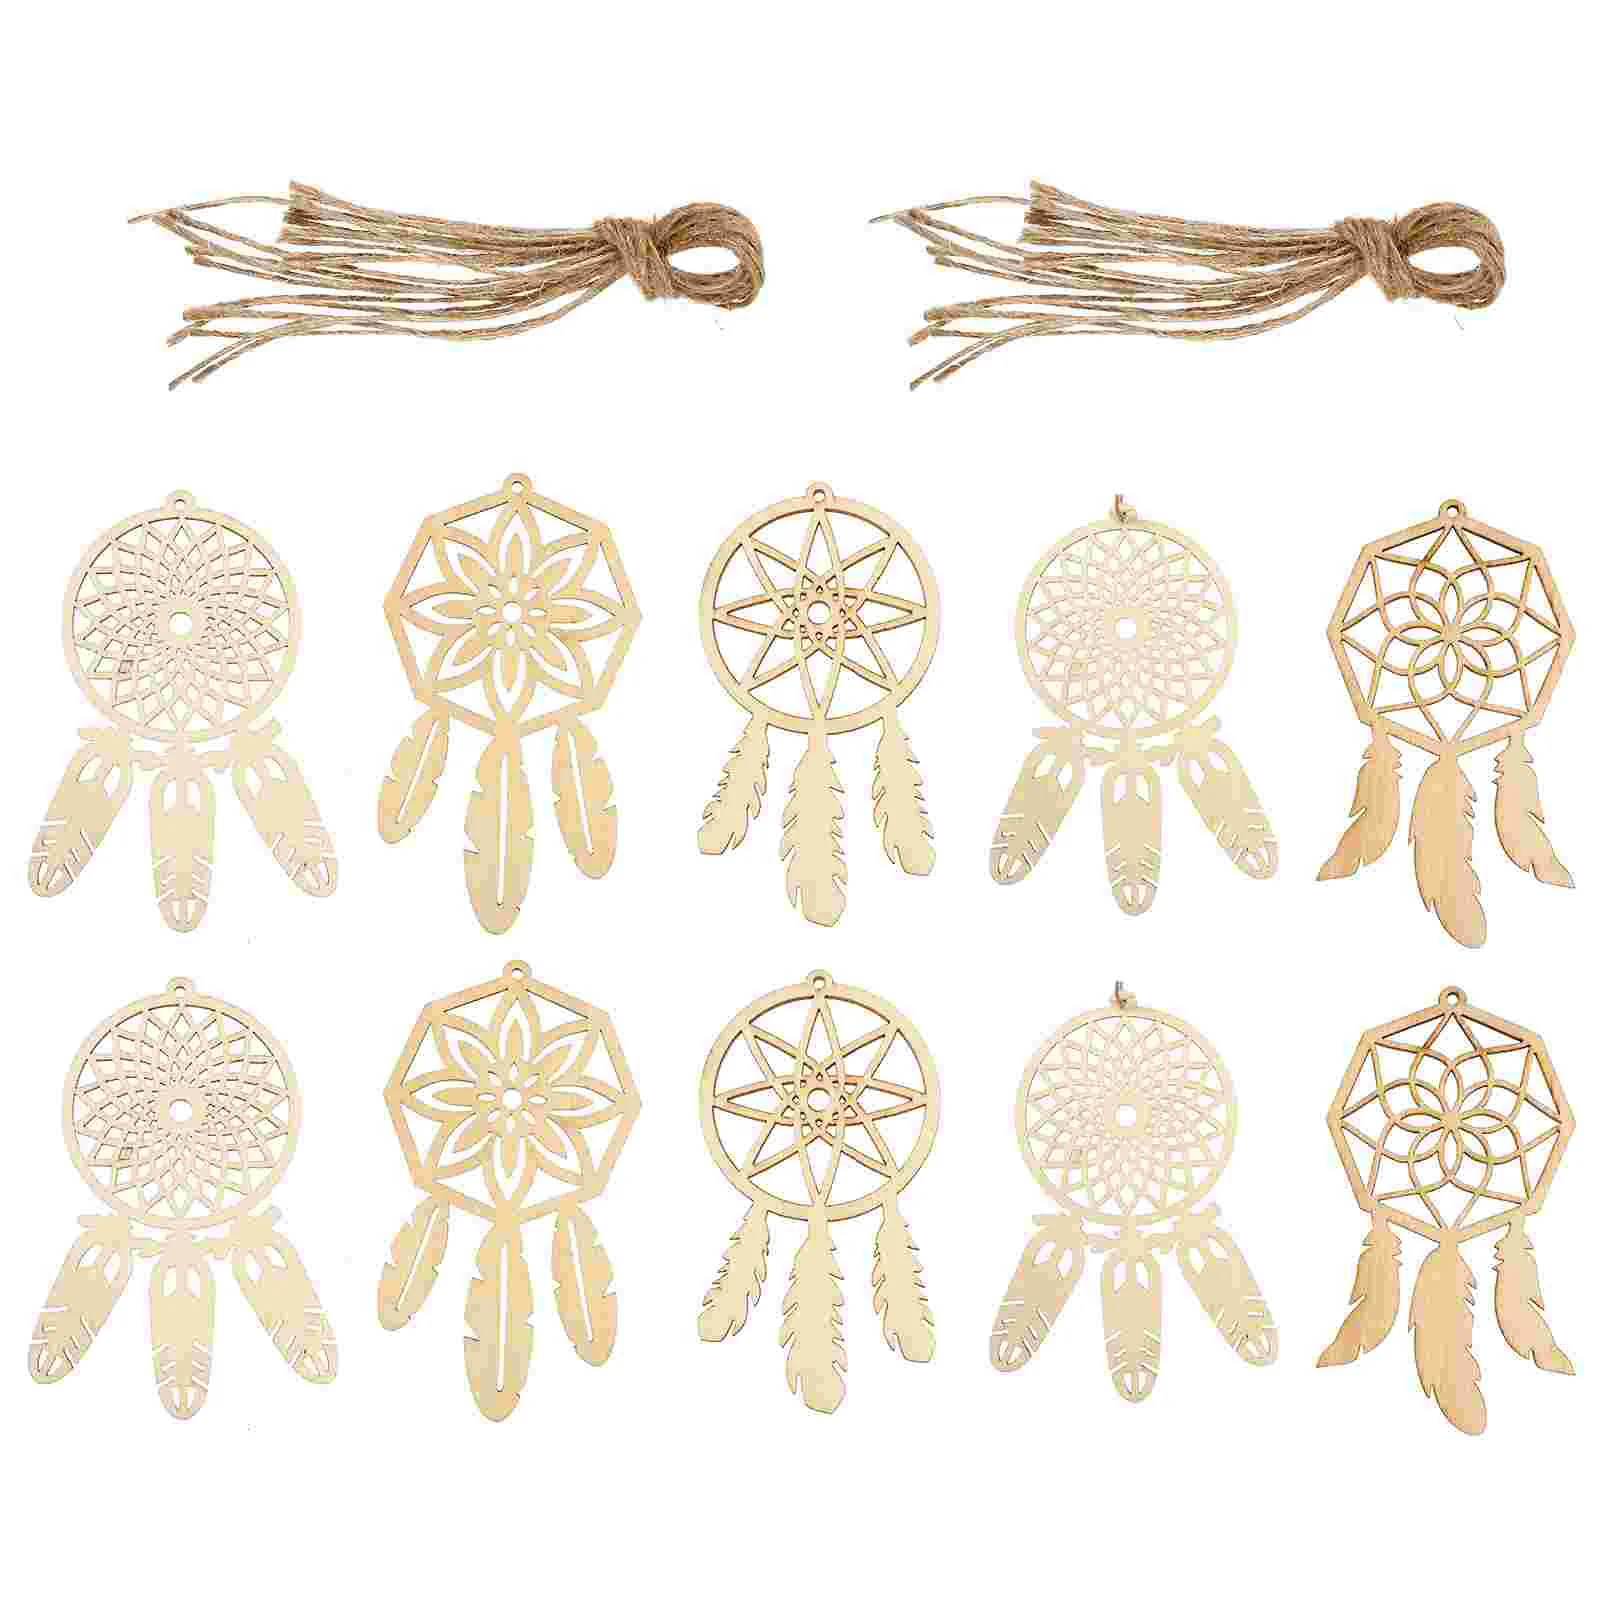 

50 Pcs Wall Hanging Decoration Wooden Dreamcatcher Home Pendant Adornment Manual Craft Delicate Stained glass